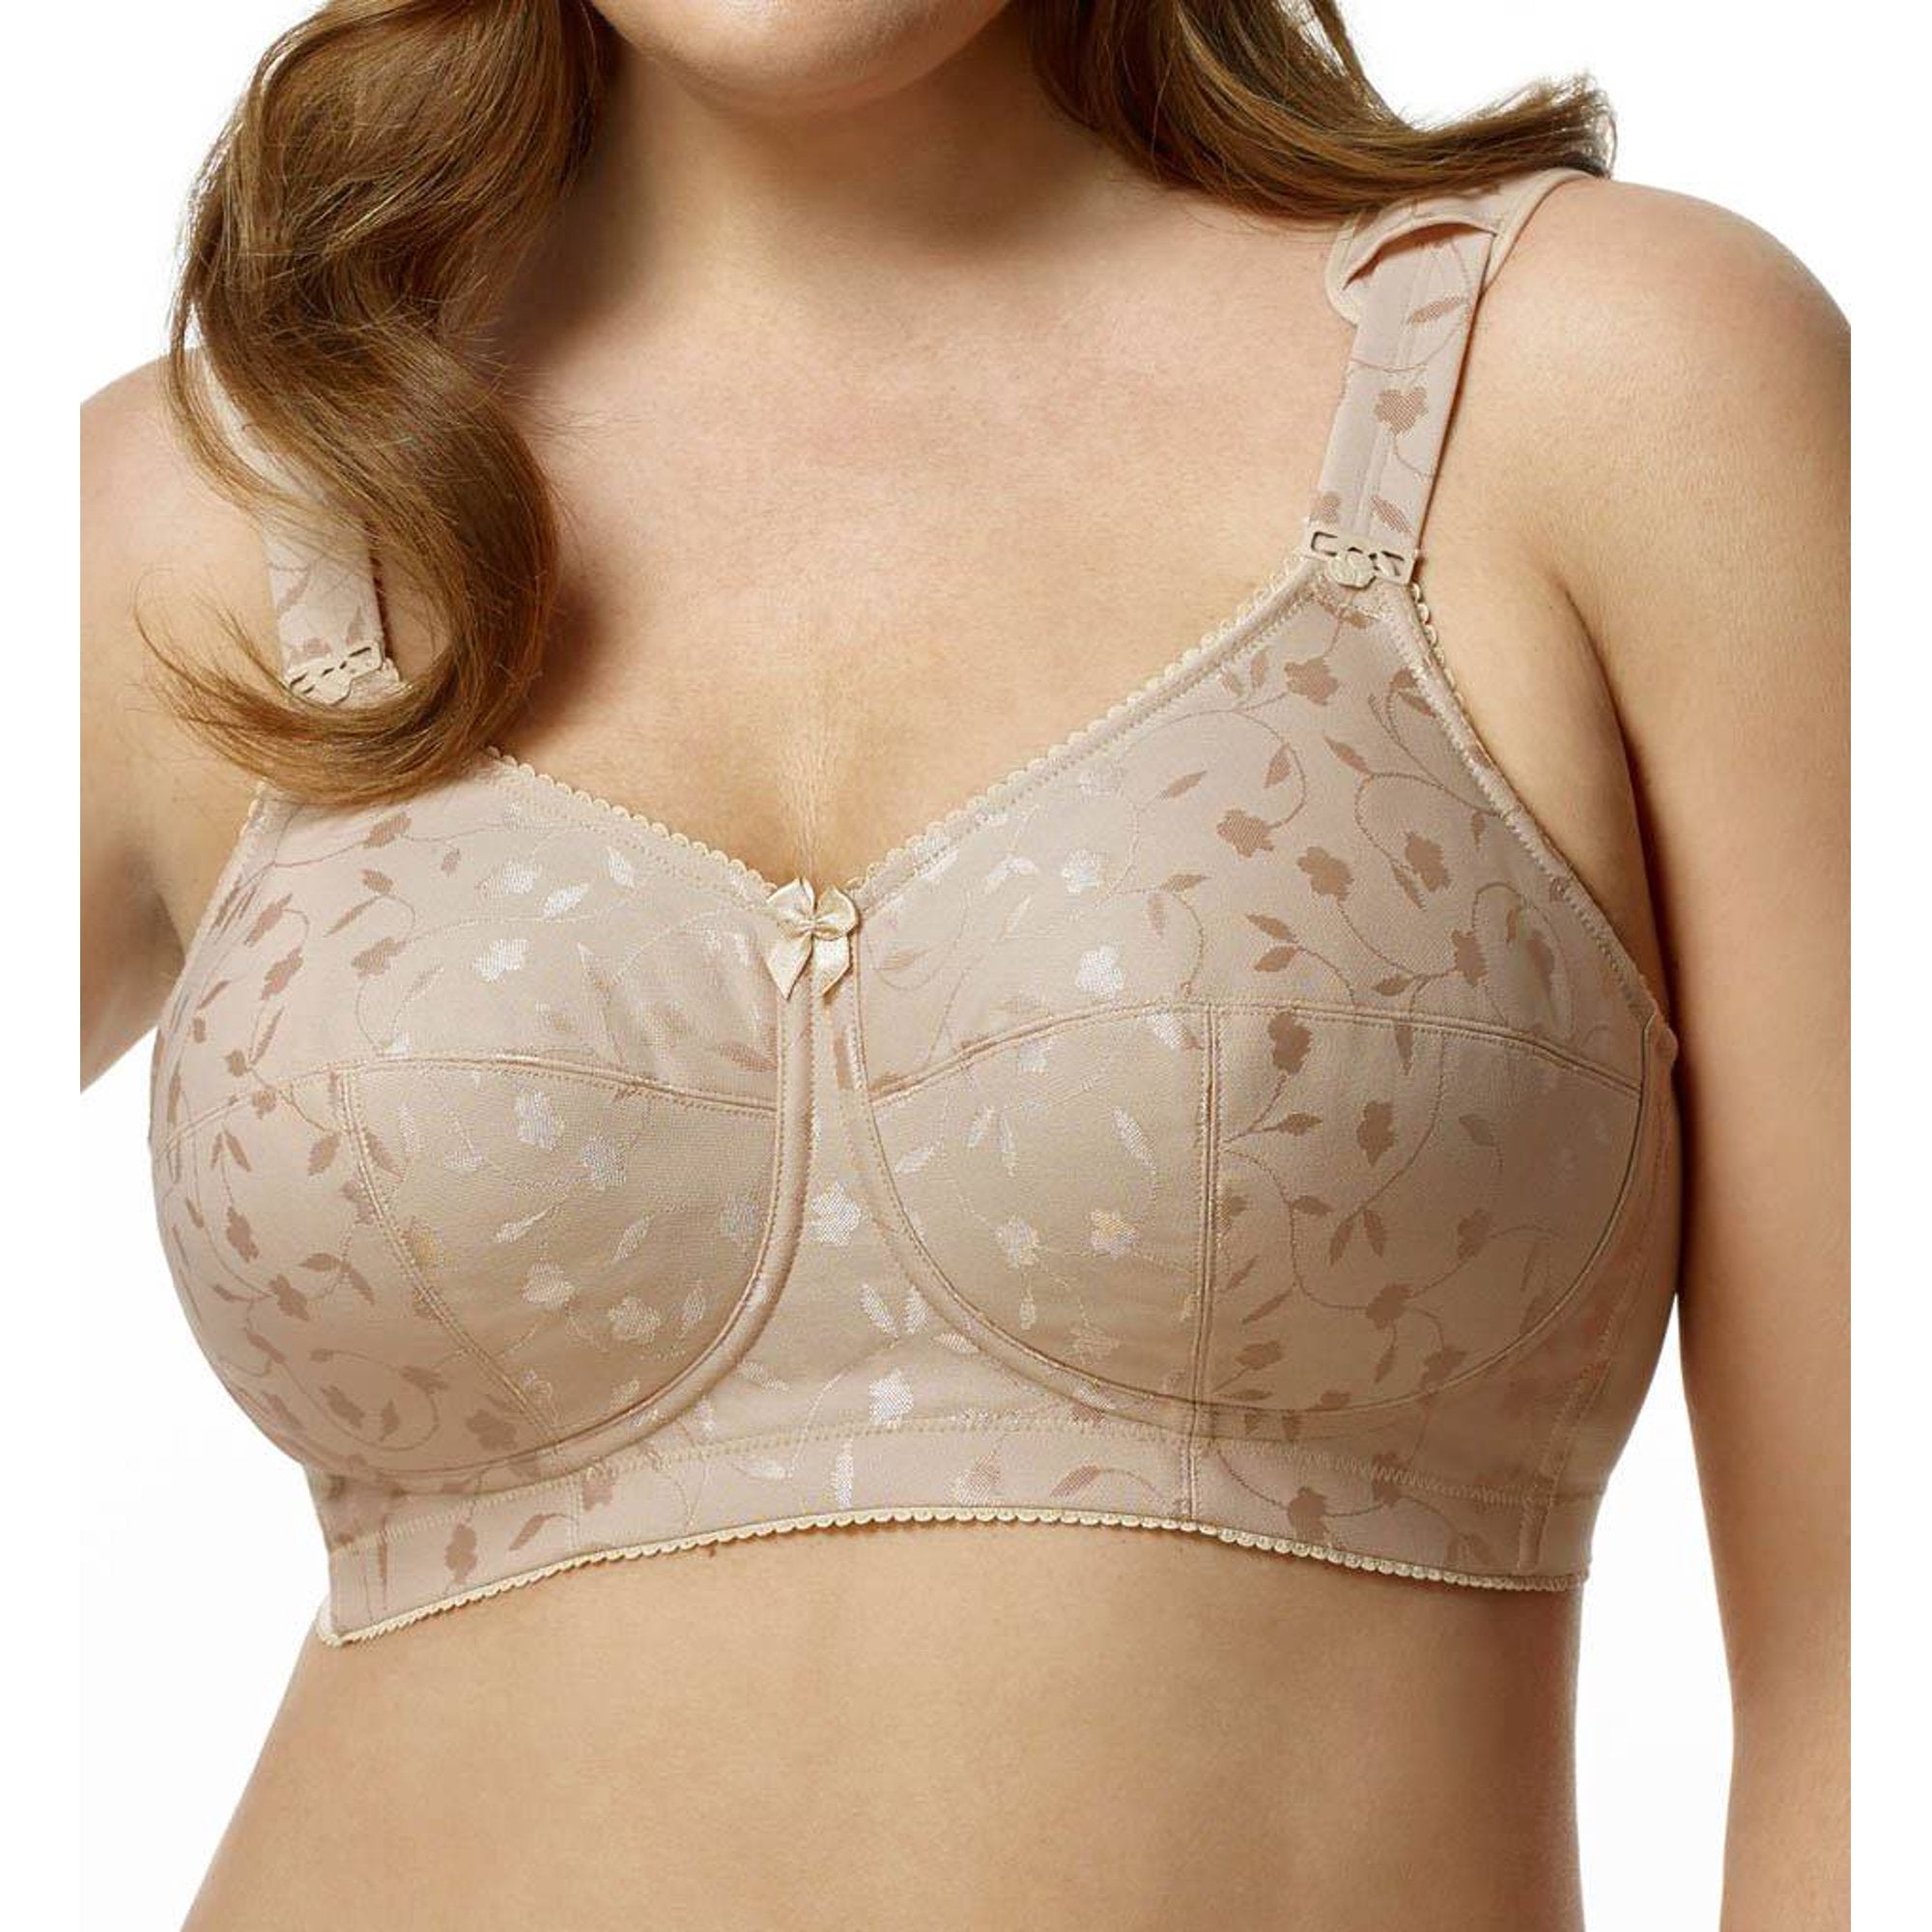 ELILA 1305 JACQUARD SOFTCUP BRA WITH CUSHIONED STRAPS – Tops & Bottoms